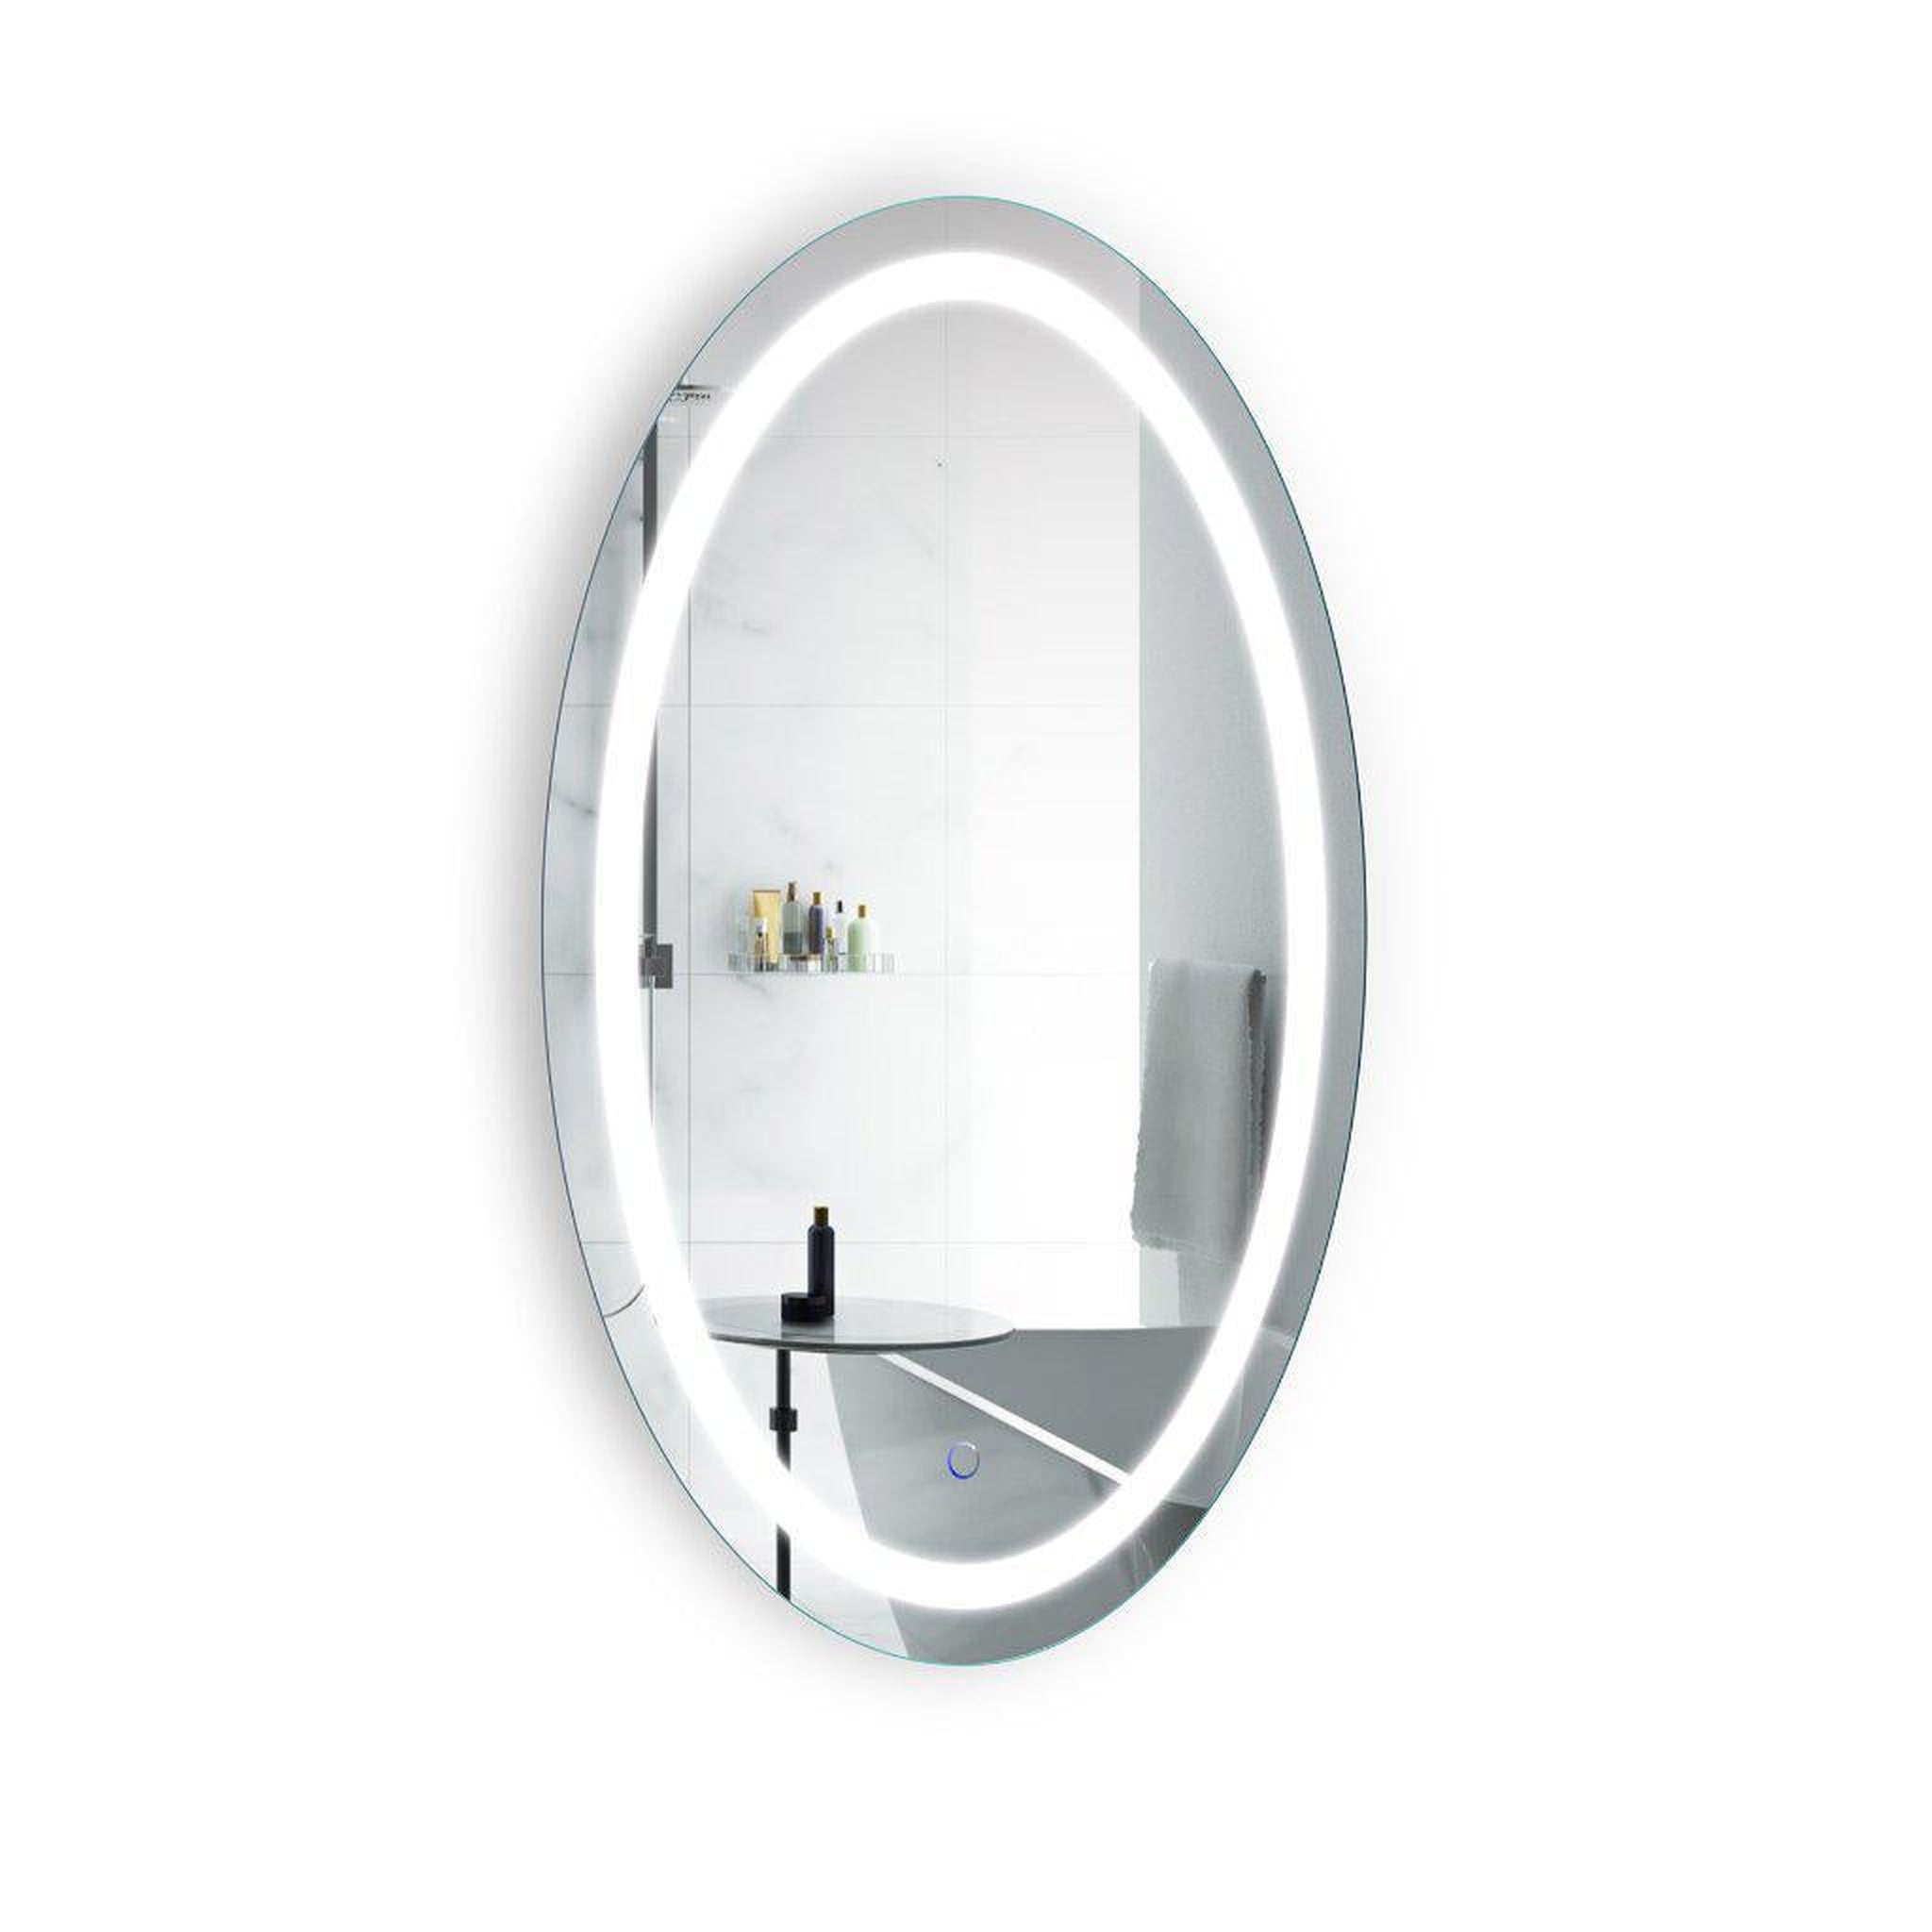 Krugg Reflections, Krugg Reflections Icon 24” x 42” 5000K Oval Wall-Mounted Illuminated Silver Backed LED  Mirror With Built-in Defogger and Touch Sensor On/Off Built-in Dimmer